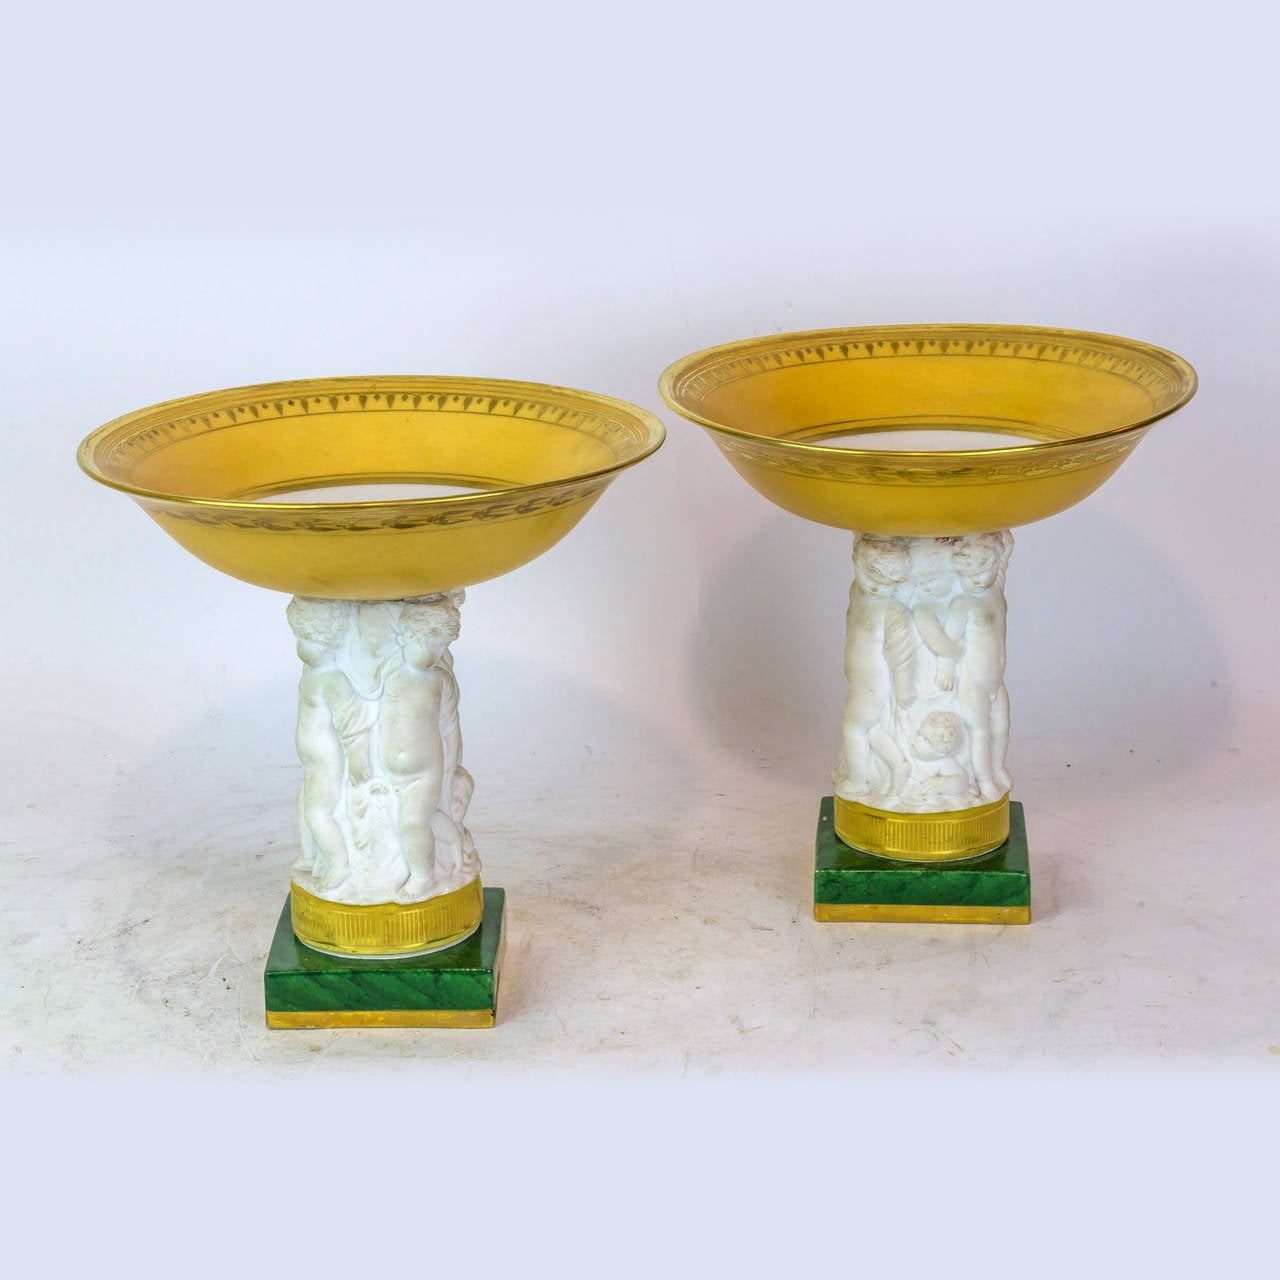 A pair of Paris porcelain bisque figural footed tazza centerpieces with cherubs.
Stock number: DA84.